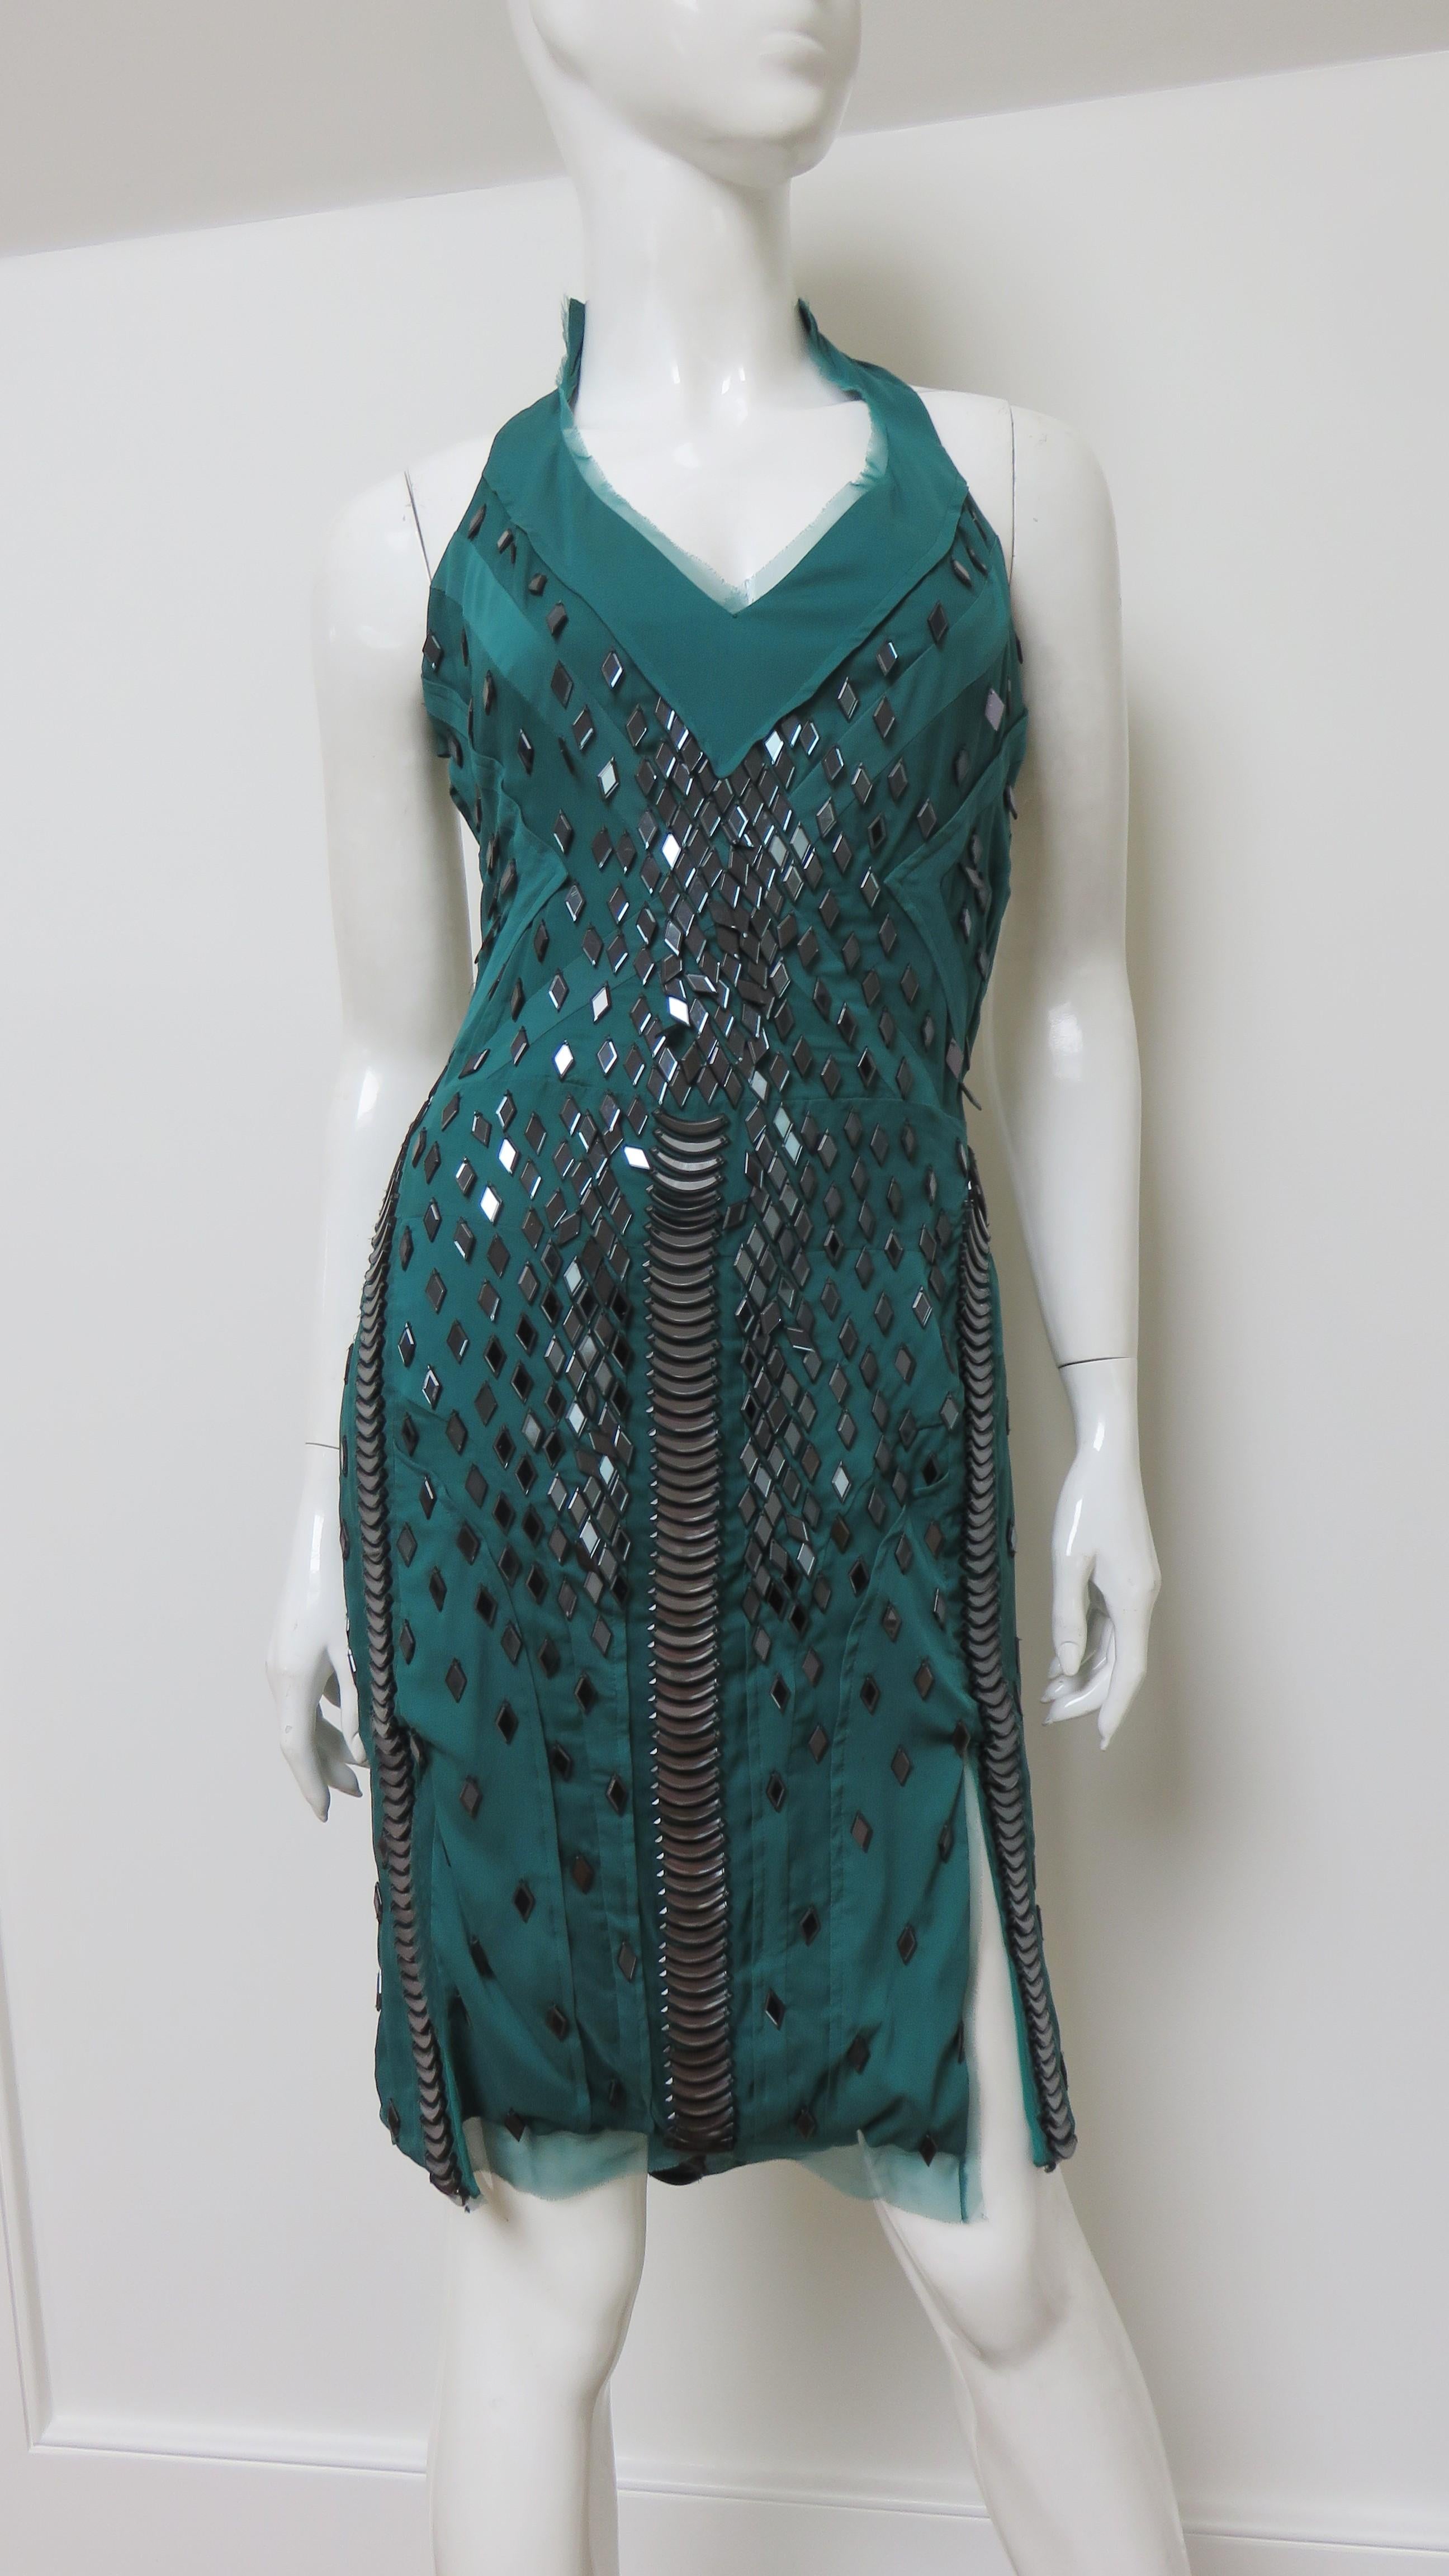  Gucci S/S 2005 New Silk Backless Dress with Appliques For Sale 4